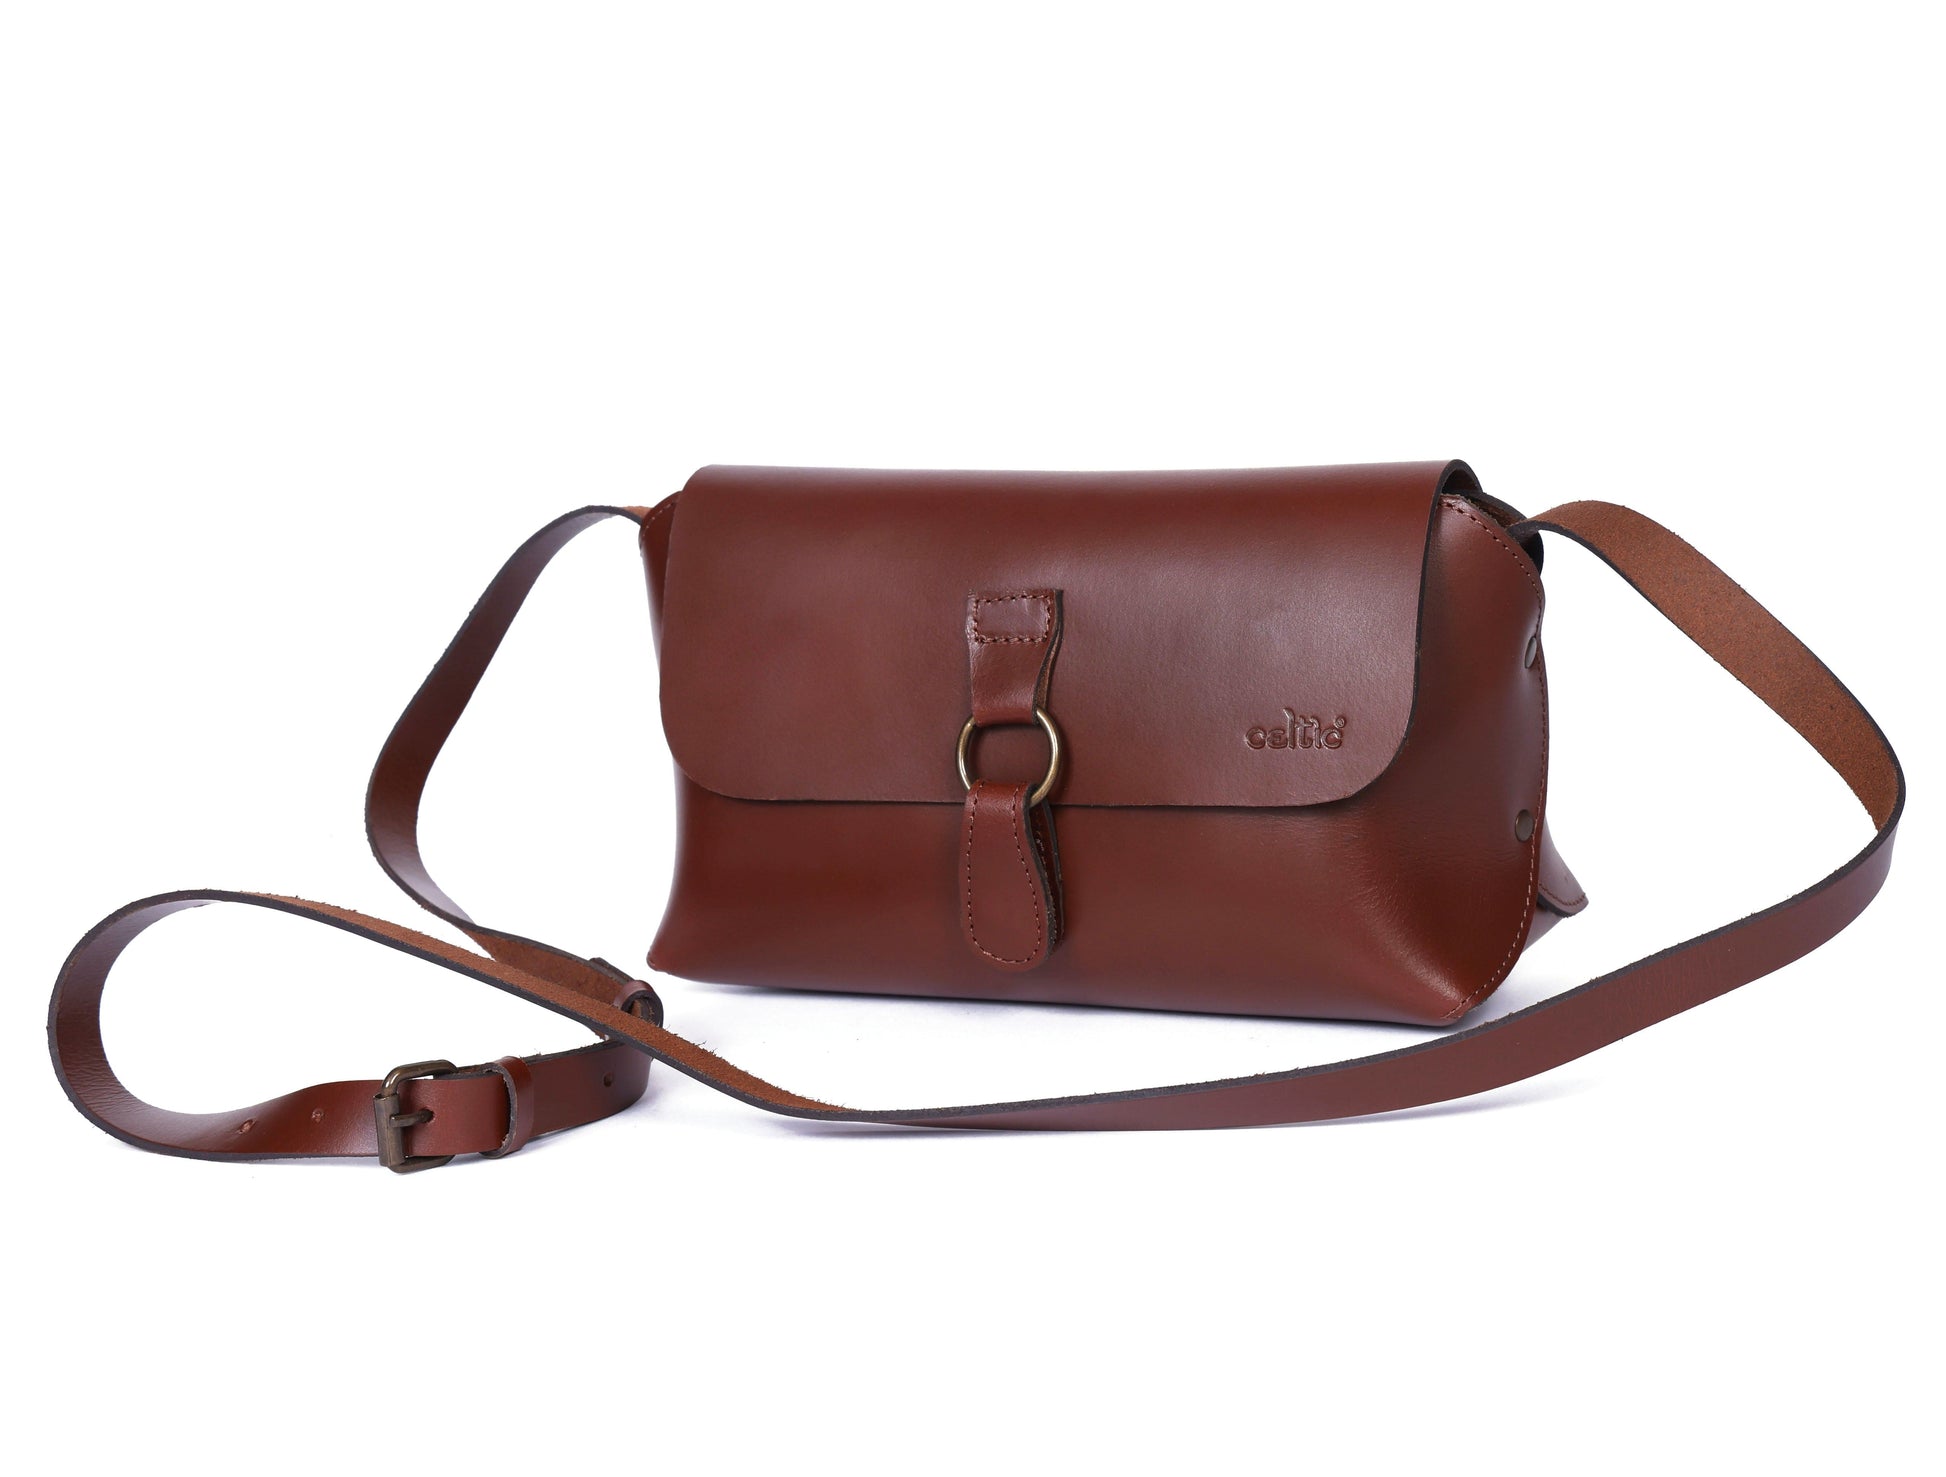 Celtic Stylish and Functional Brown Leather Cross Body Bag - Perfect for Everyday Use. - CELTICINDIA